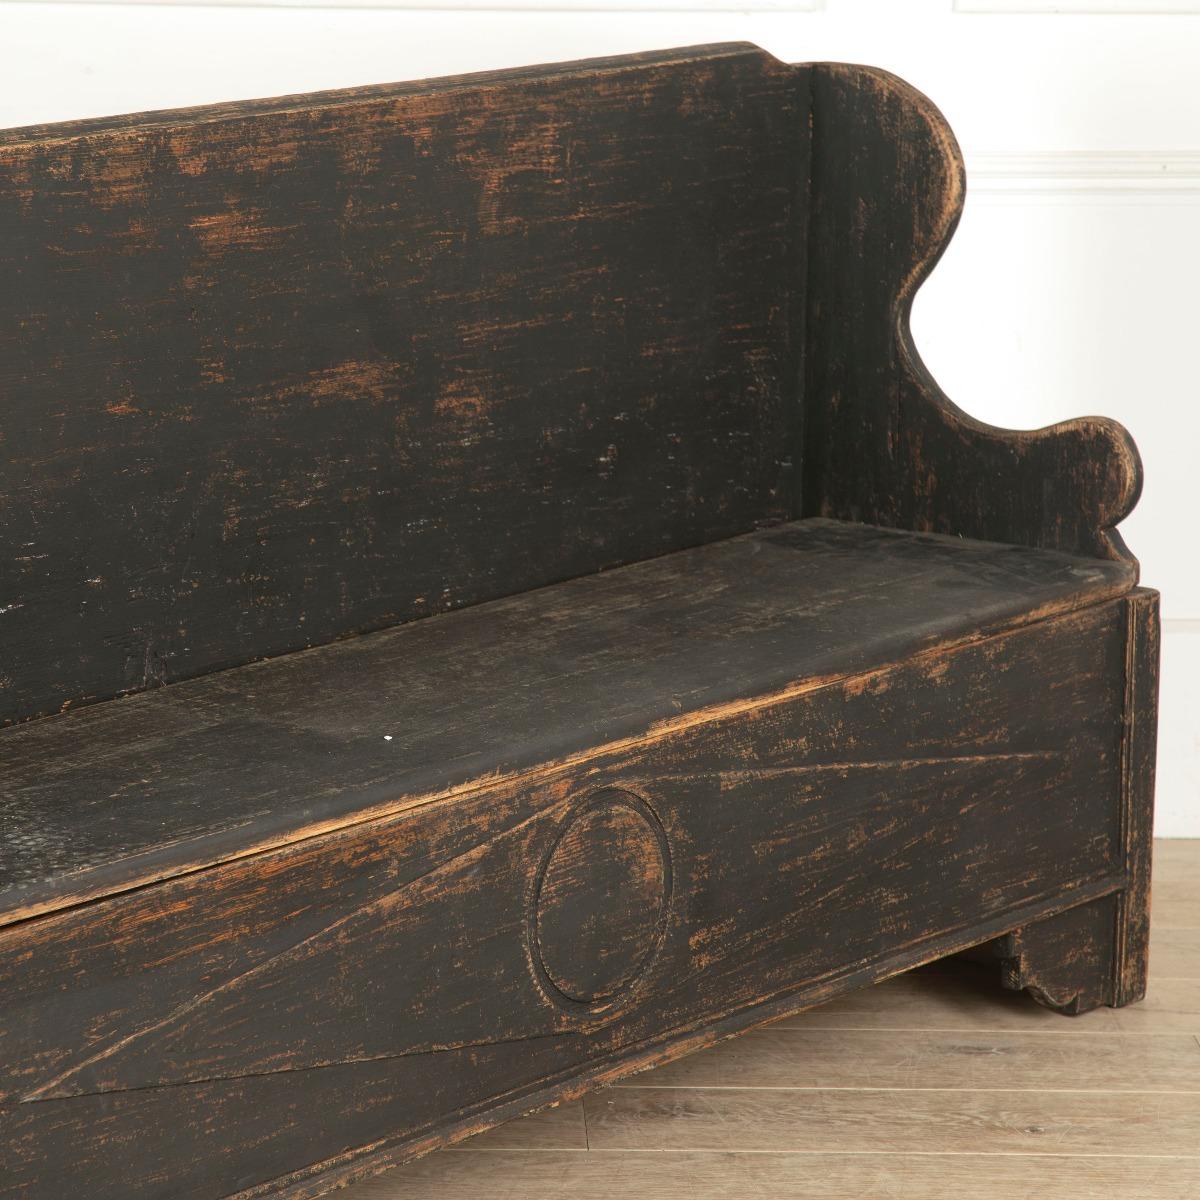 Striking 19th Century Norwegian painted bench, with storage under the seat.

This primitive bench has been painted black, the original coat touched up over the years. The paint has distressed in places, adding to the authentic charm of the piece.